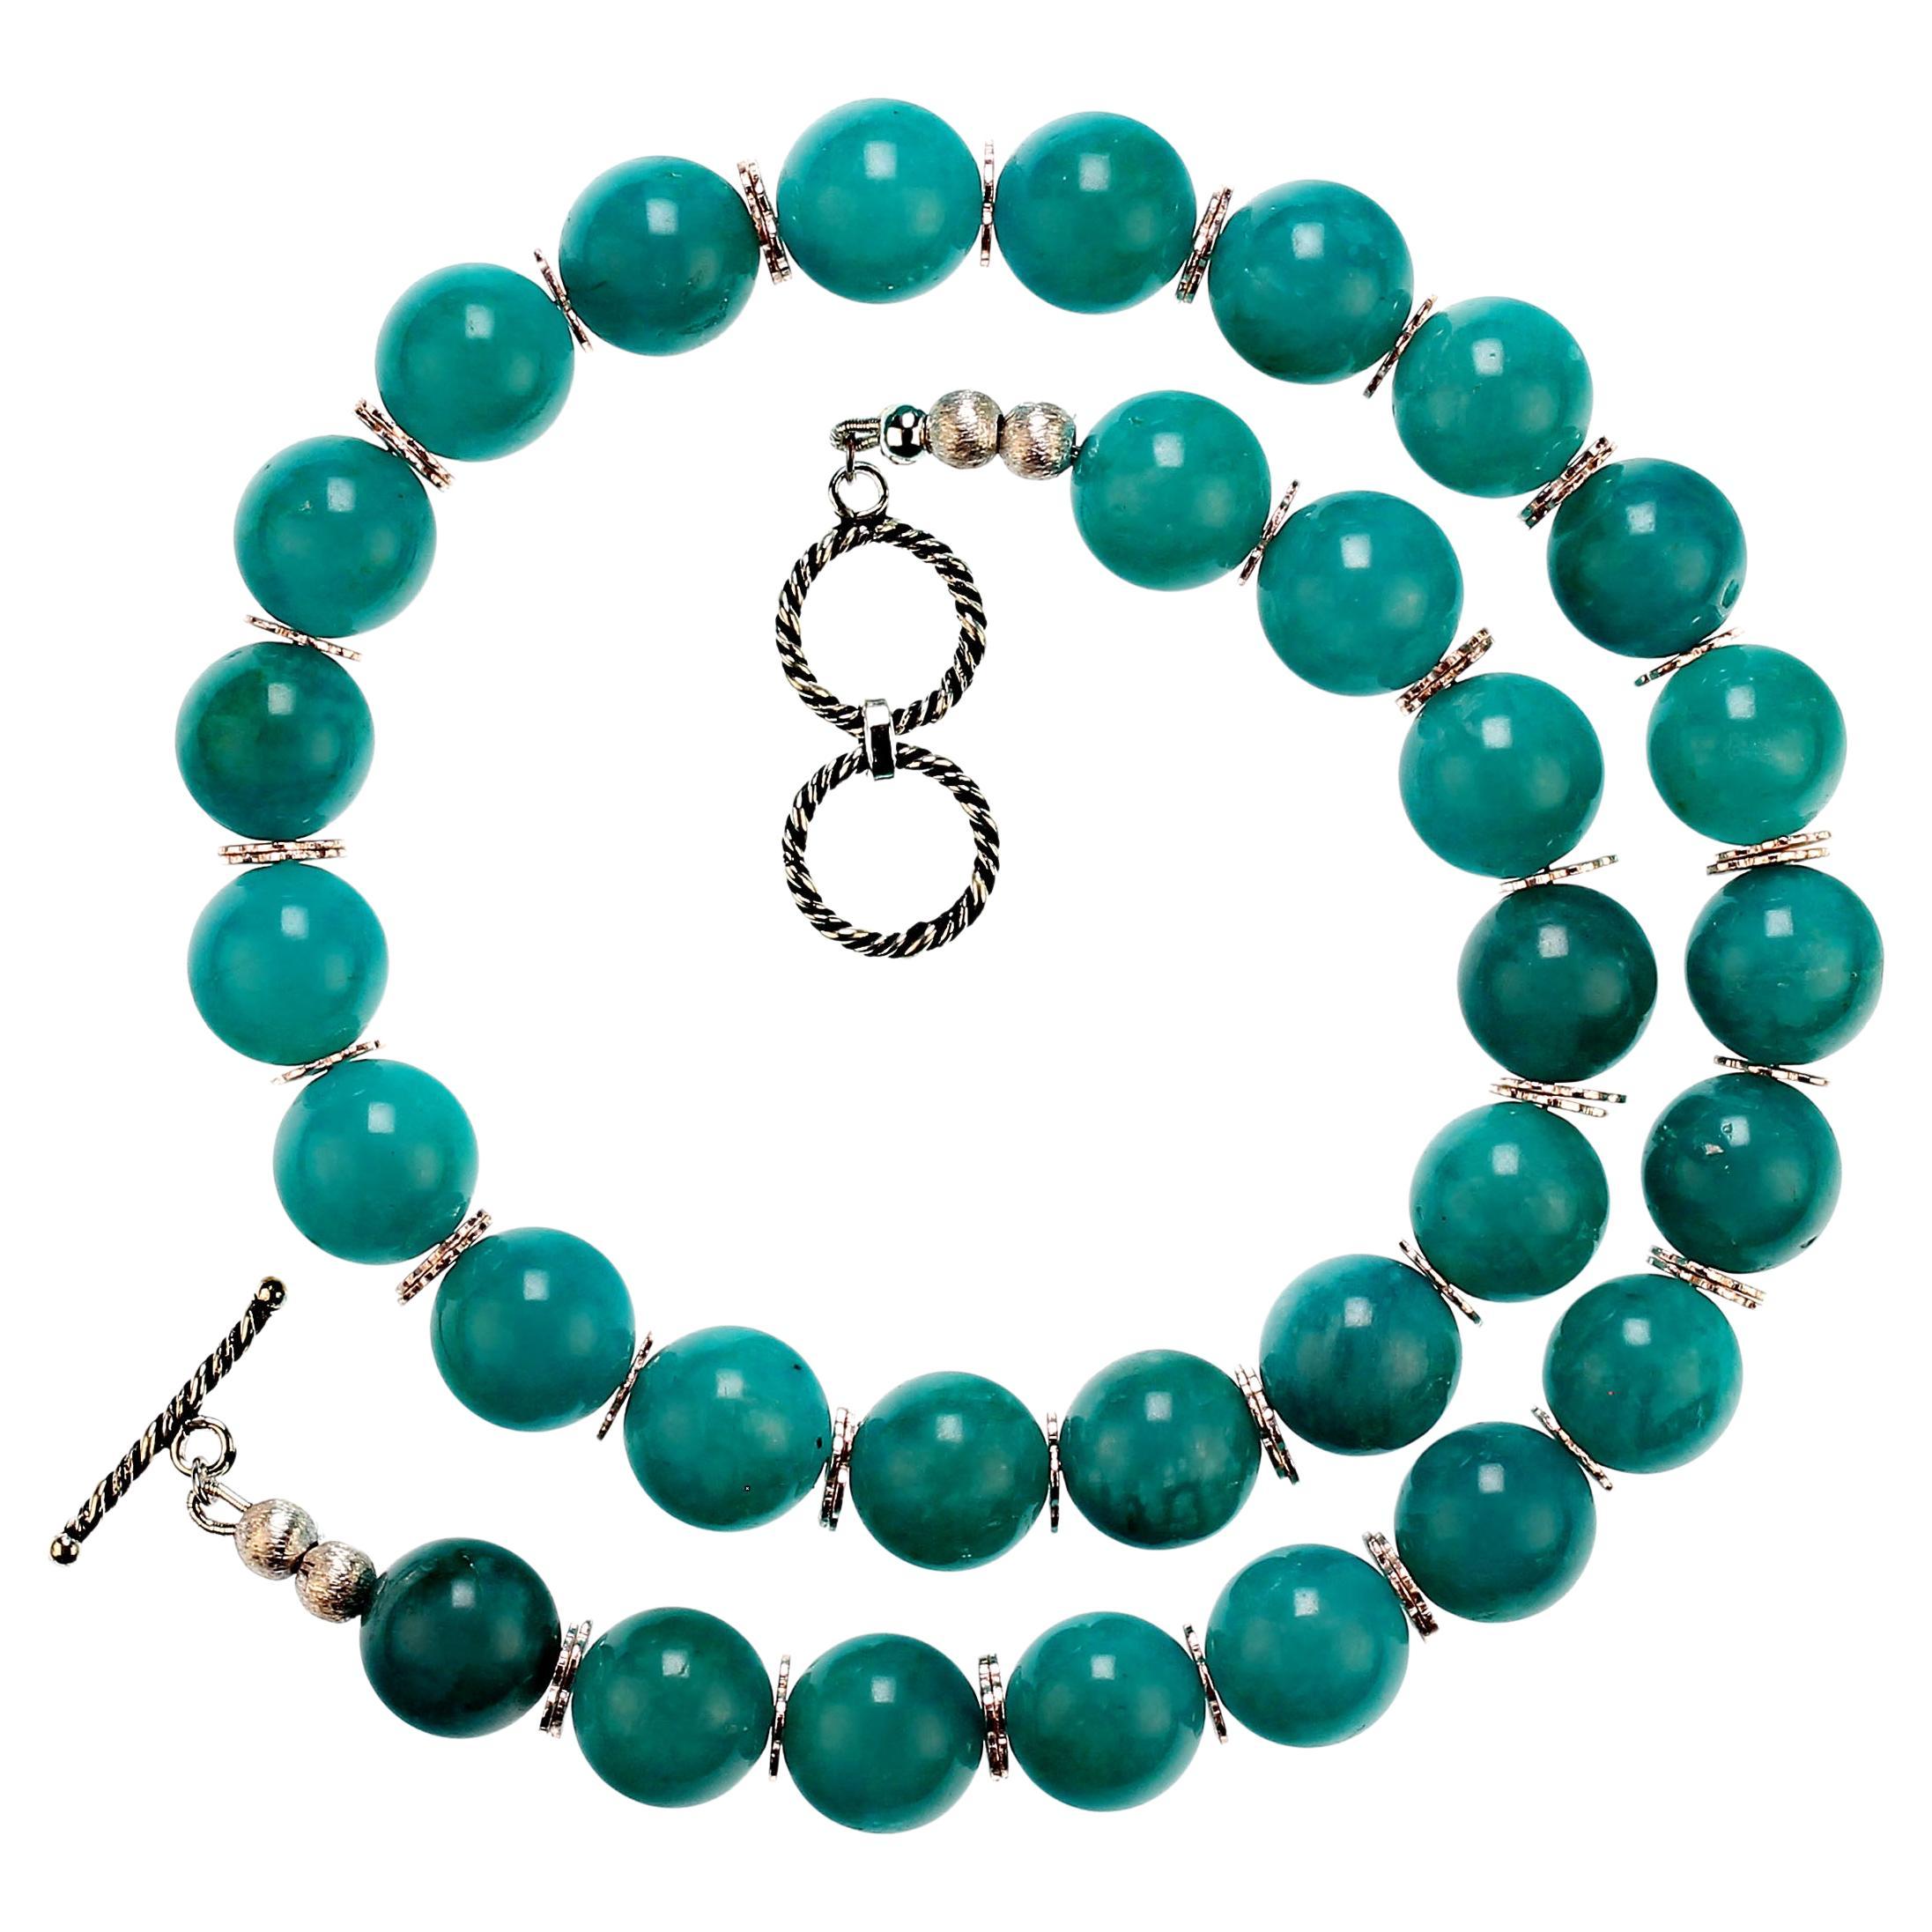 Artisan AJD Gorgeous glowing green 20-inch Amazonite necklace  Great Gift! For Sale